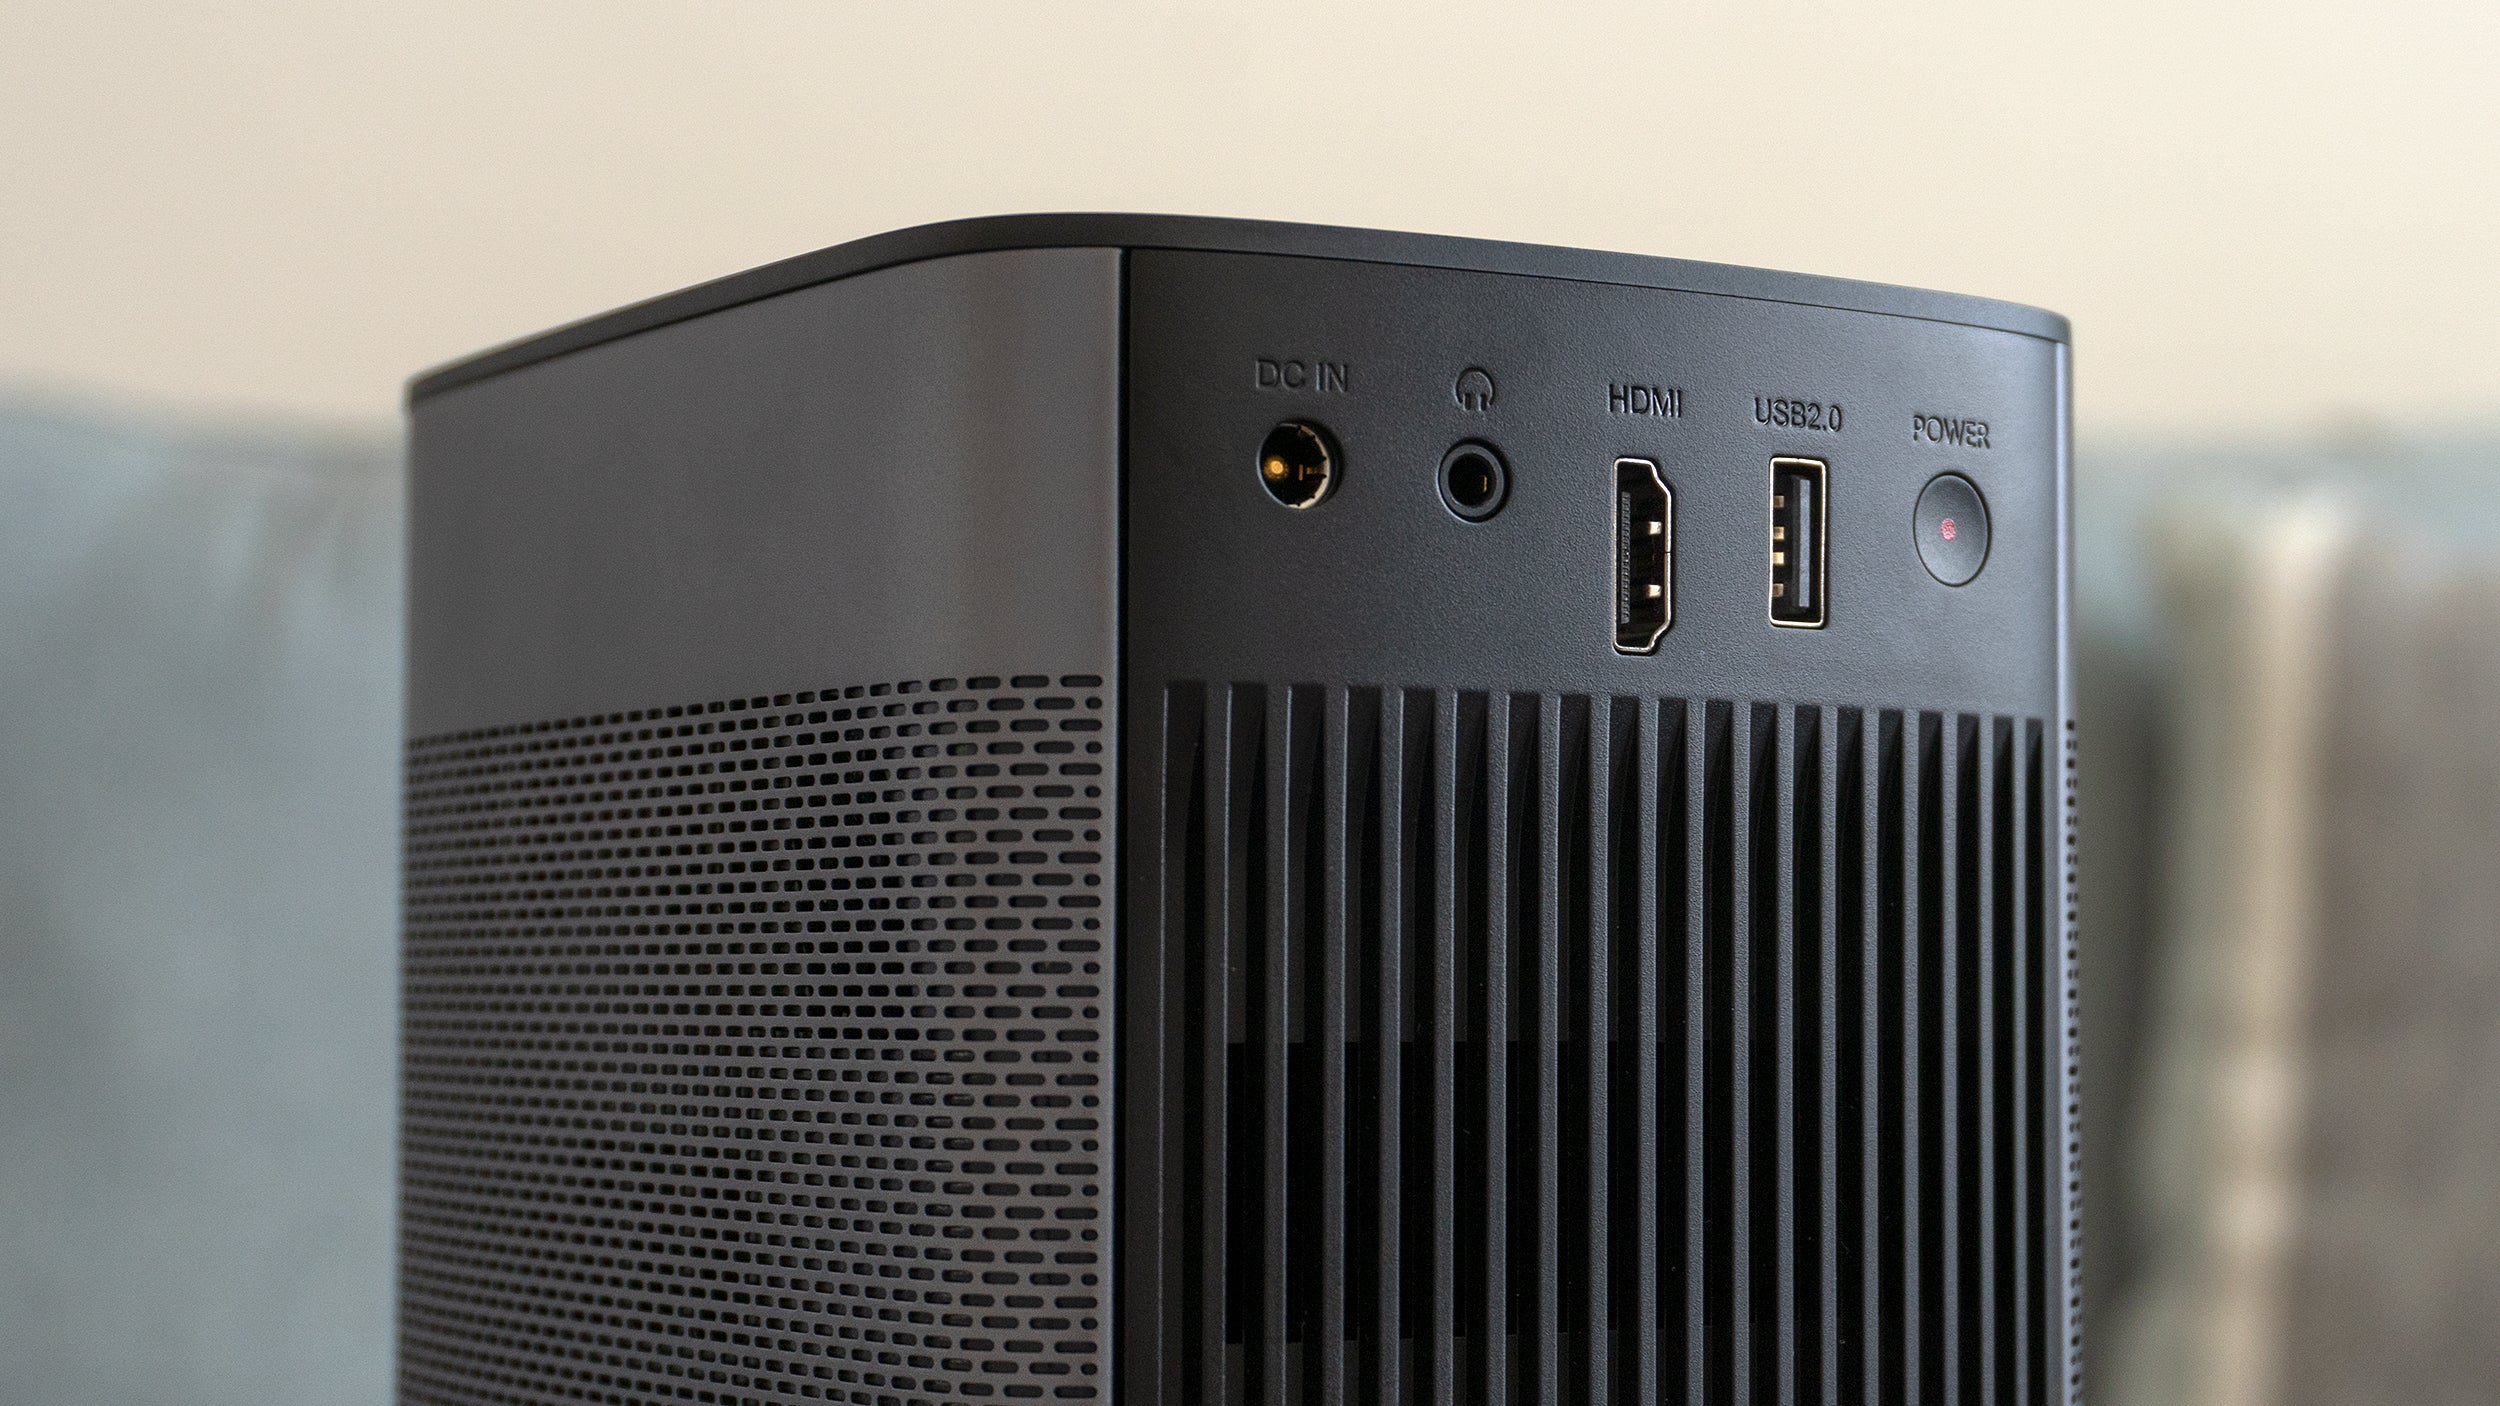 Connectivity on the XGIMI Halo+ is basic, with an HDMI port, a headphone jack, and a USB 2.0 port that can be used to attach storage drives full of non-streaming content. (Photo: Andrew Liszewski | Gizmodo)